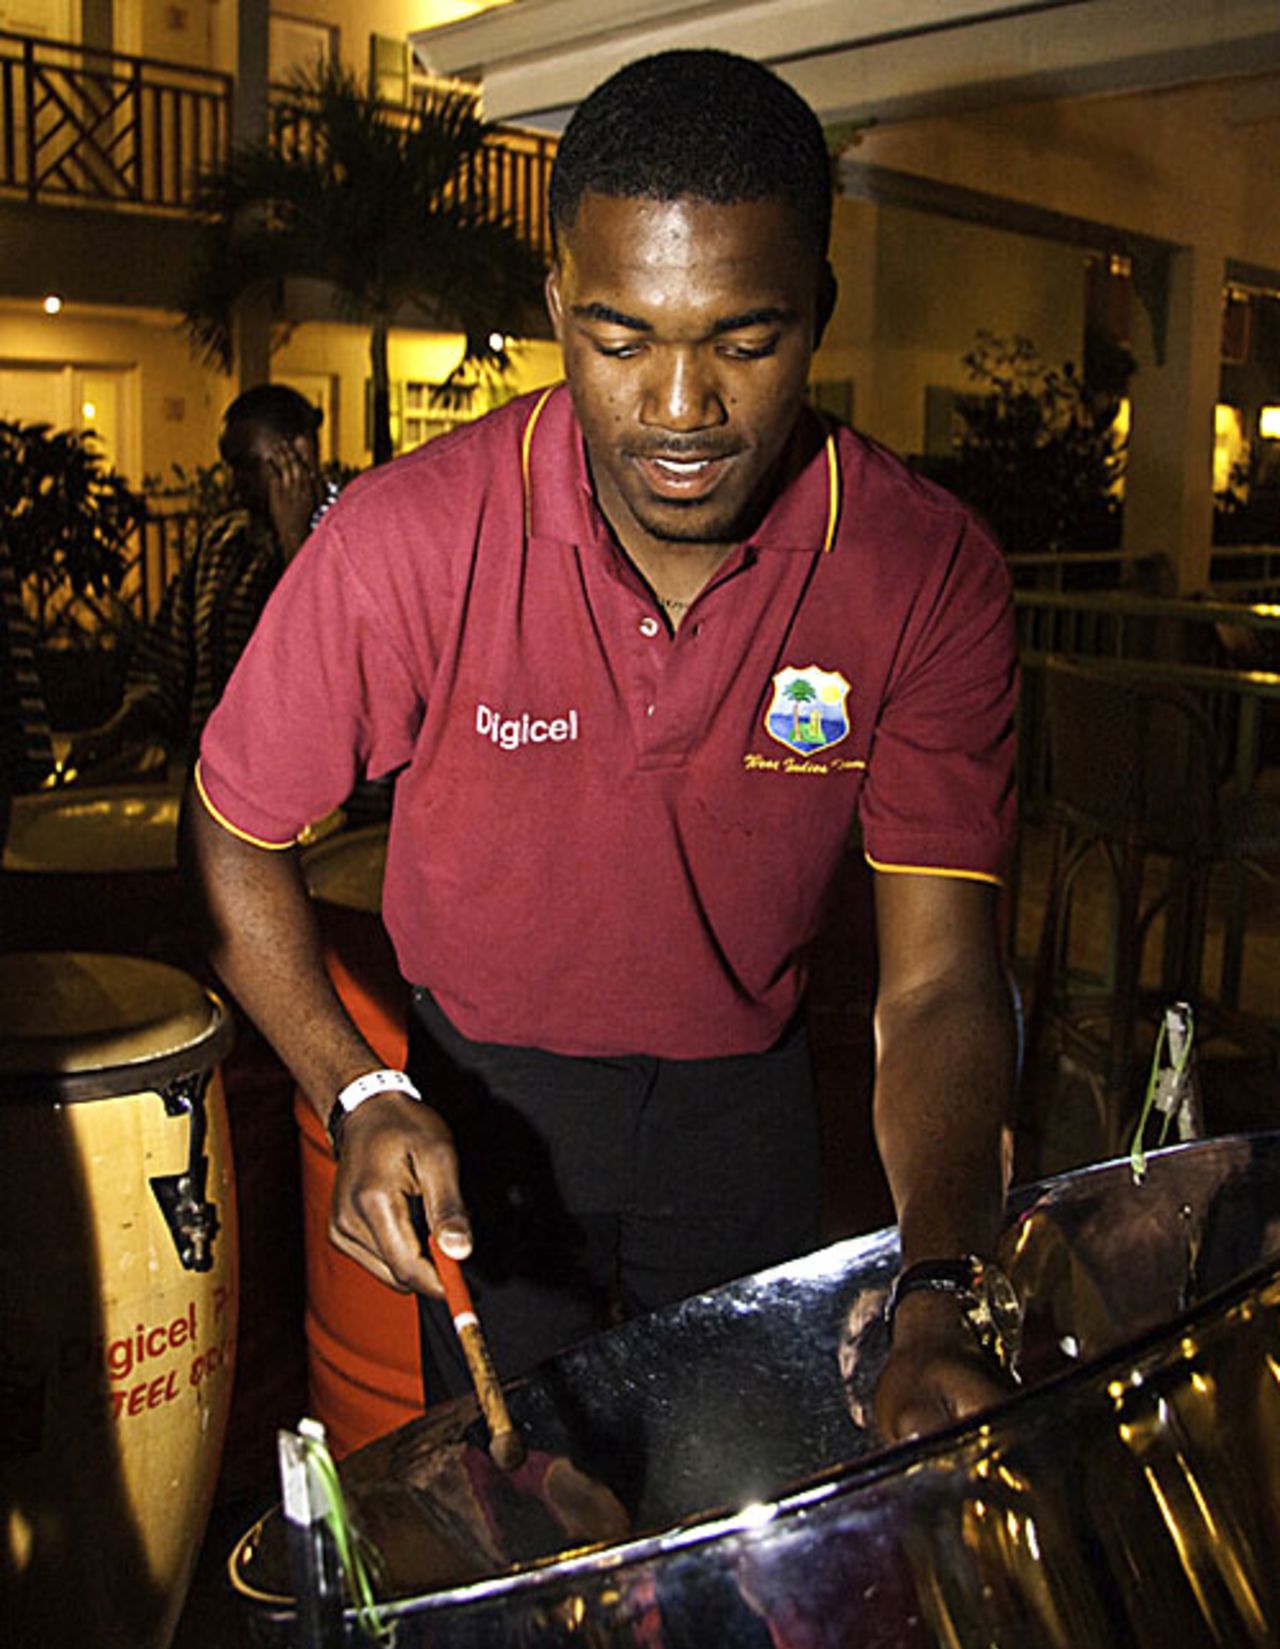 Darren Bravo plays pan on arrival in St Lucia, St Lucia, June 30, 2009 